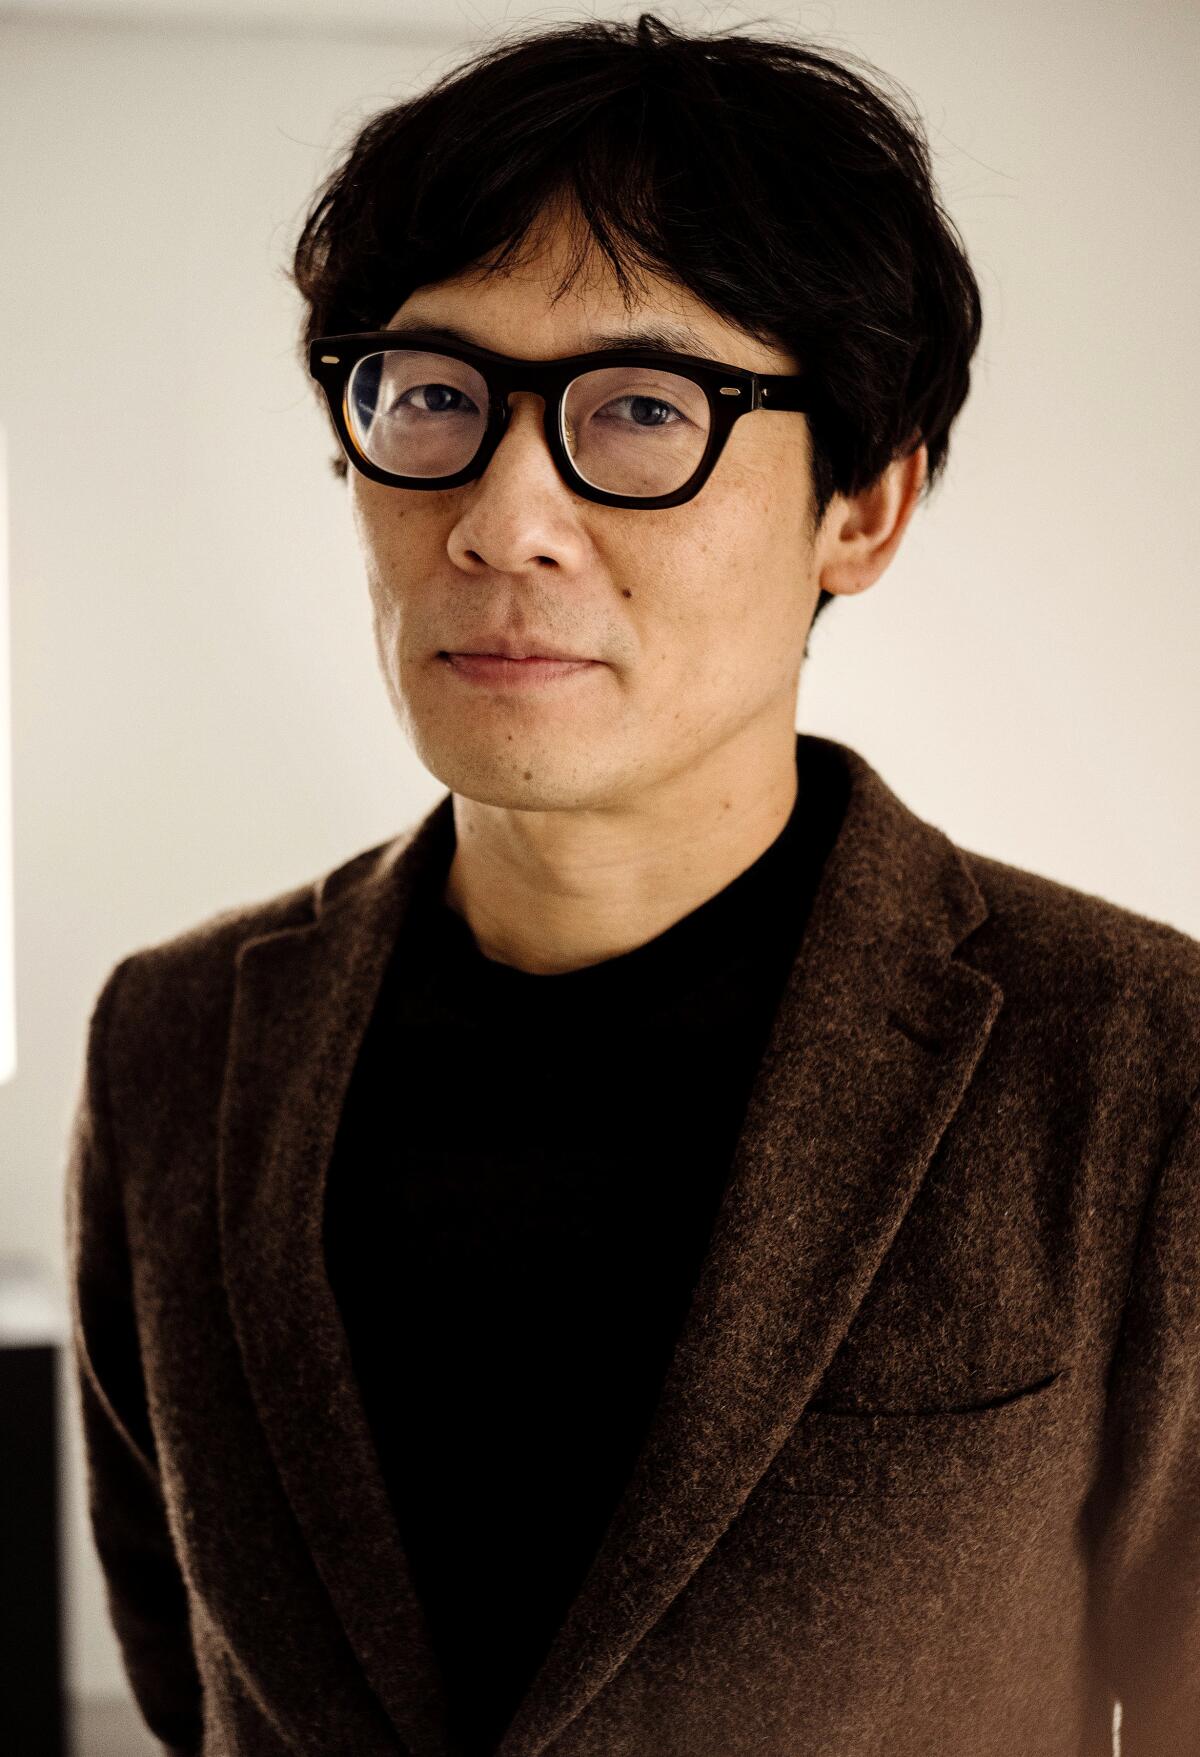 A  man with dark hair and square glasses in a dark shirt and jacket.